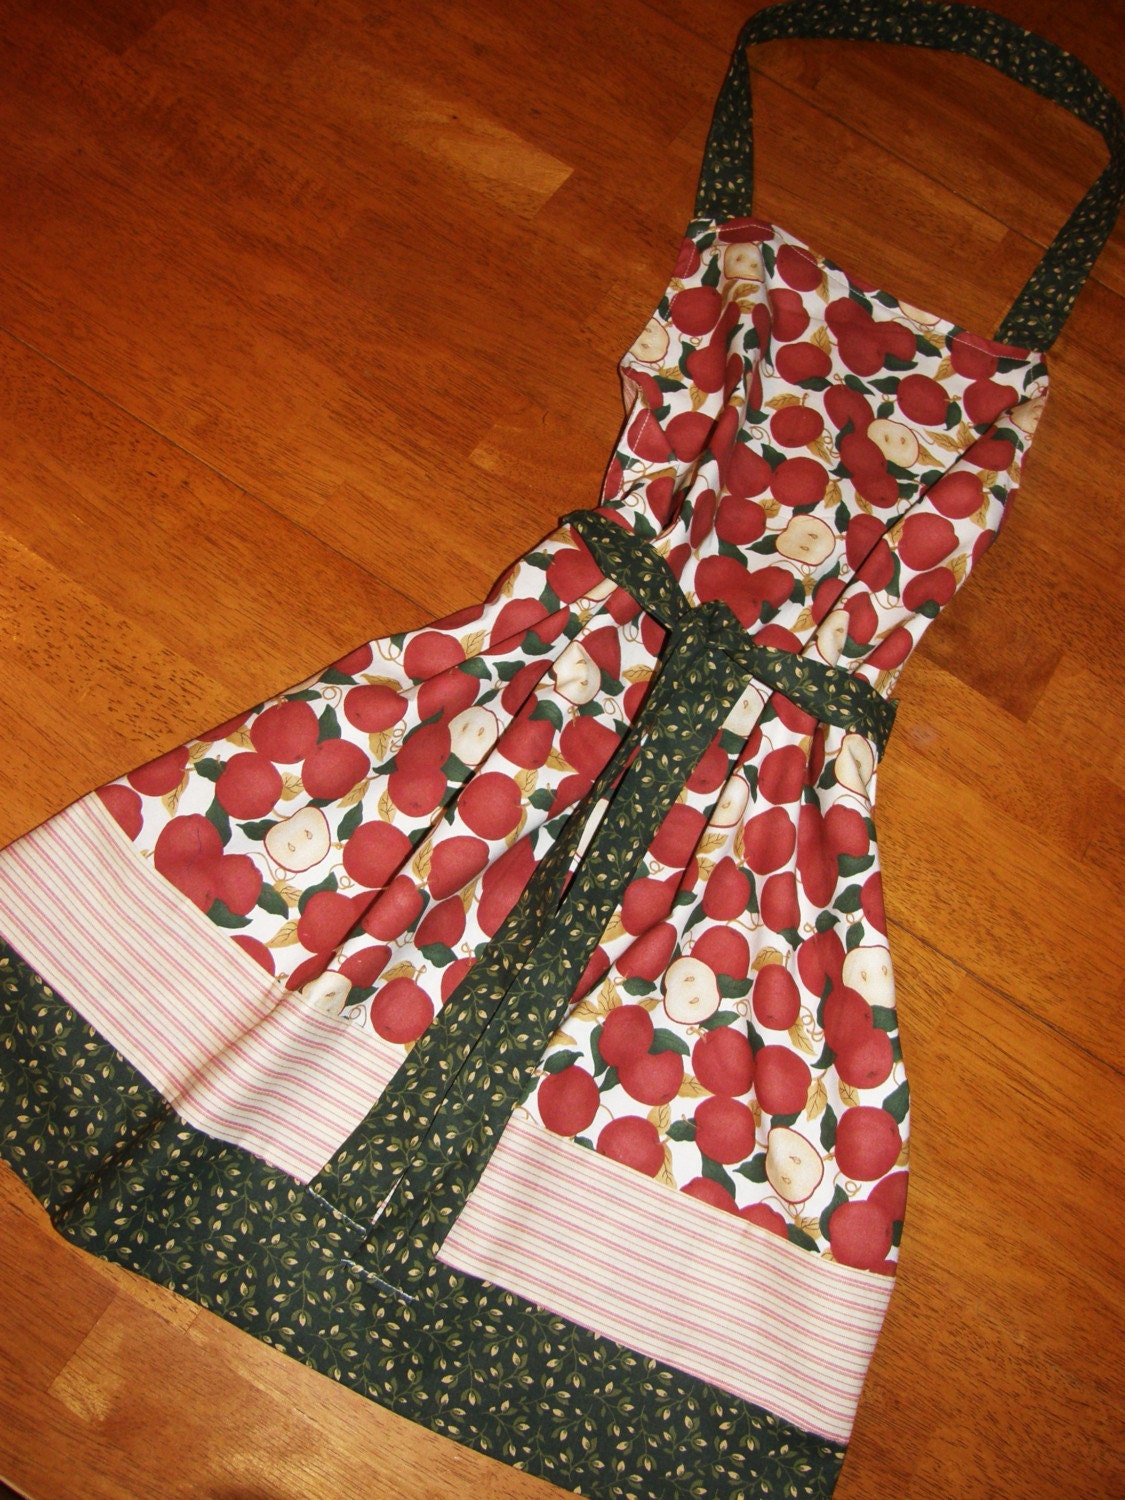 Sweet red apples and vintage stripes apron with leafy green trim - classy side pockets and it's reversible for women or that special teacher